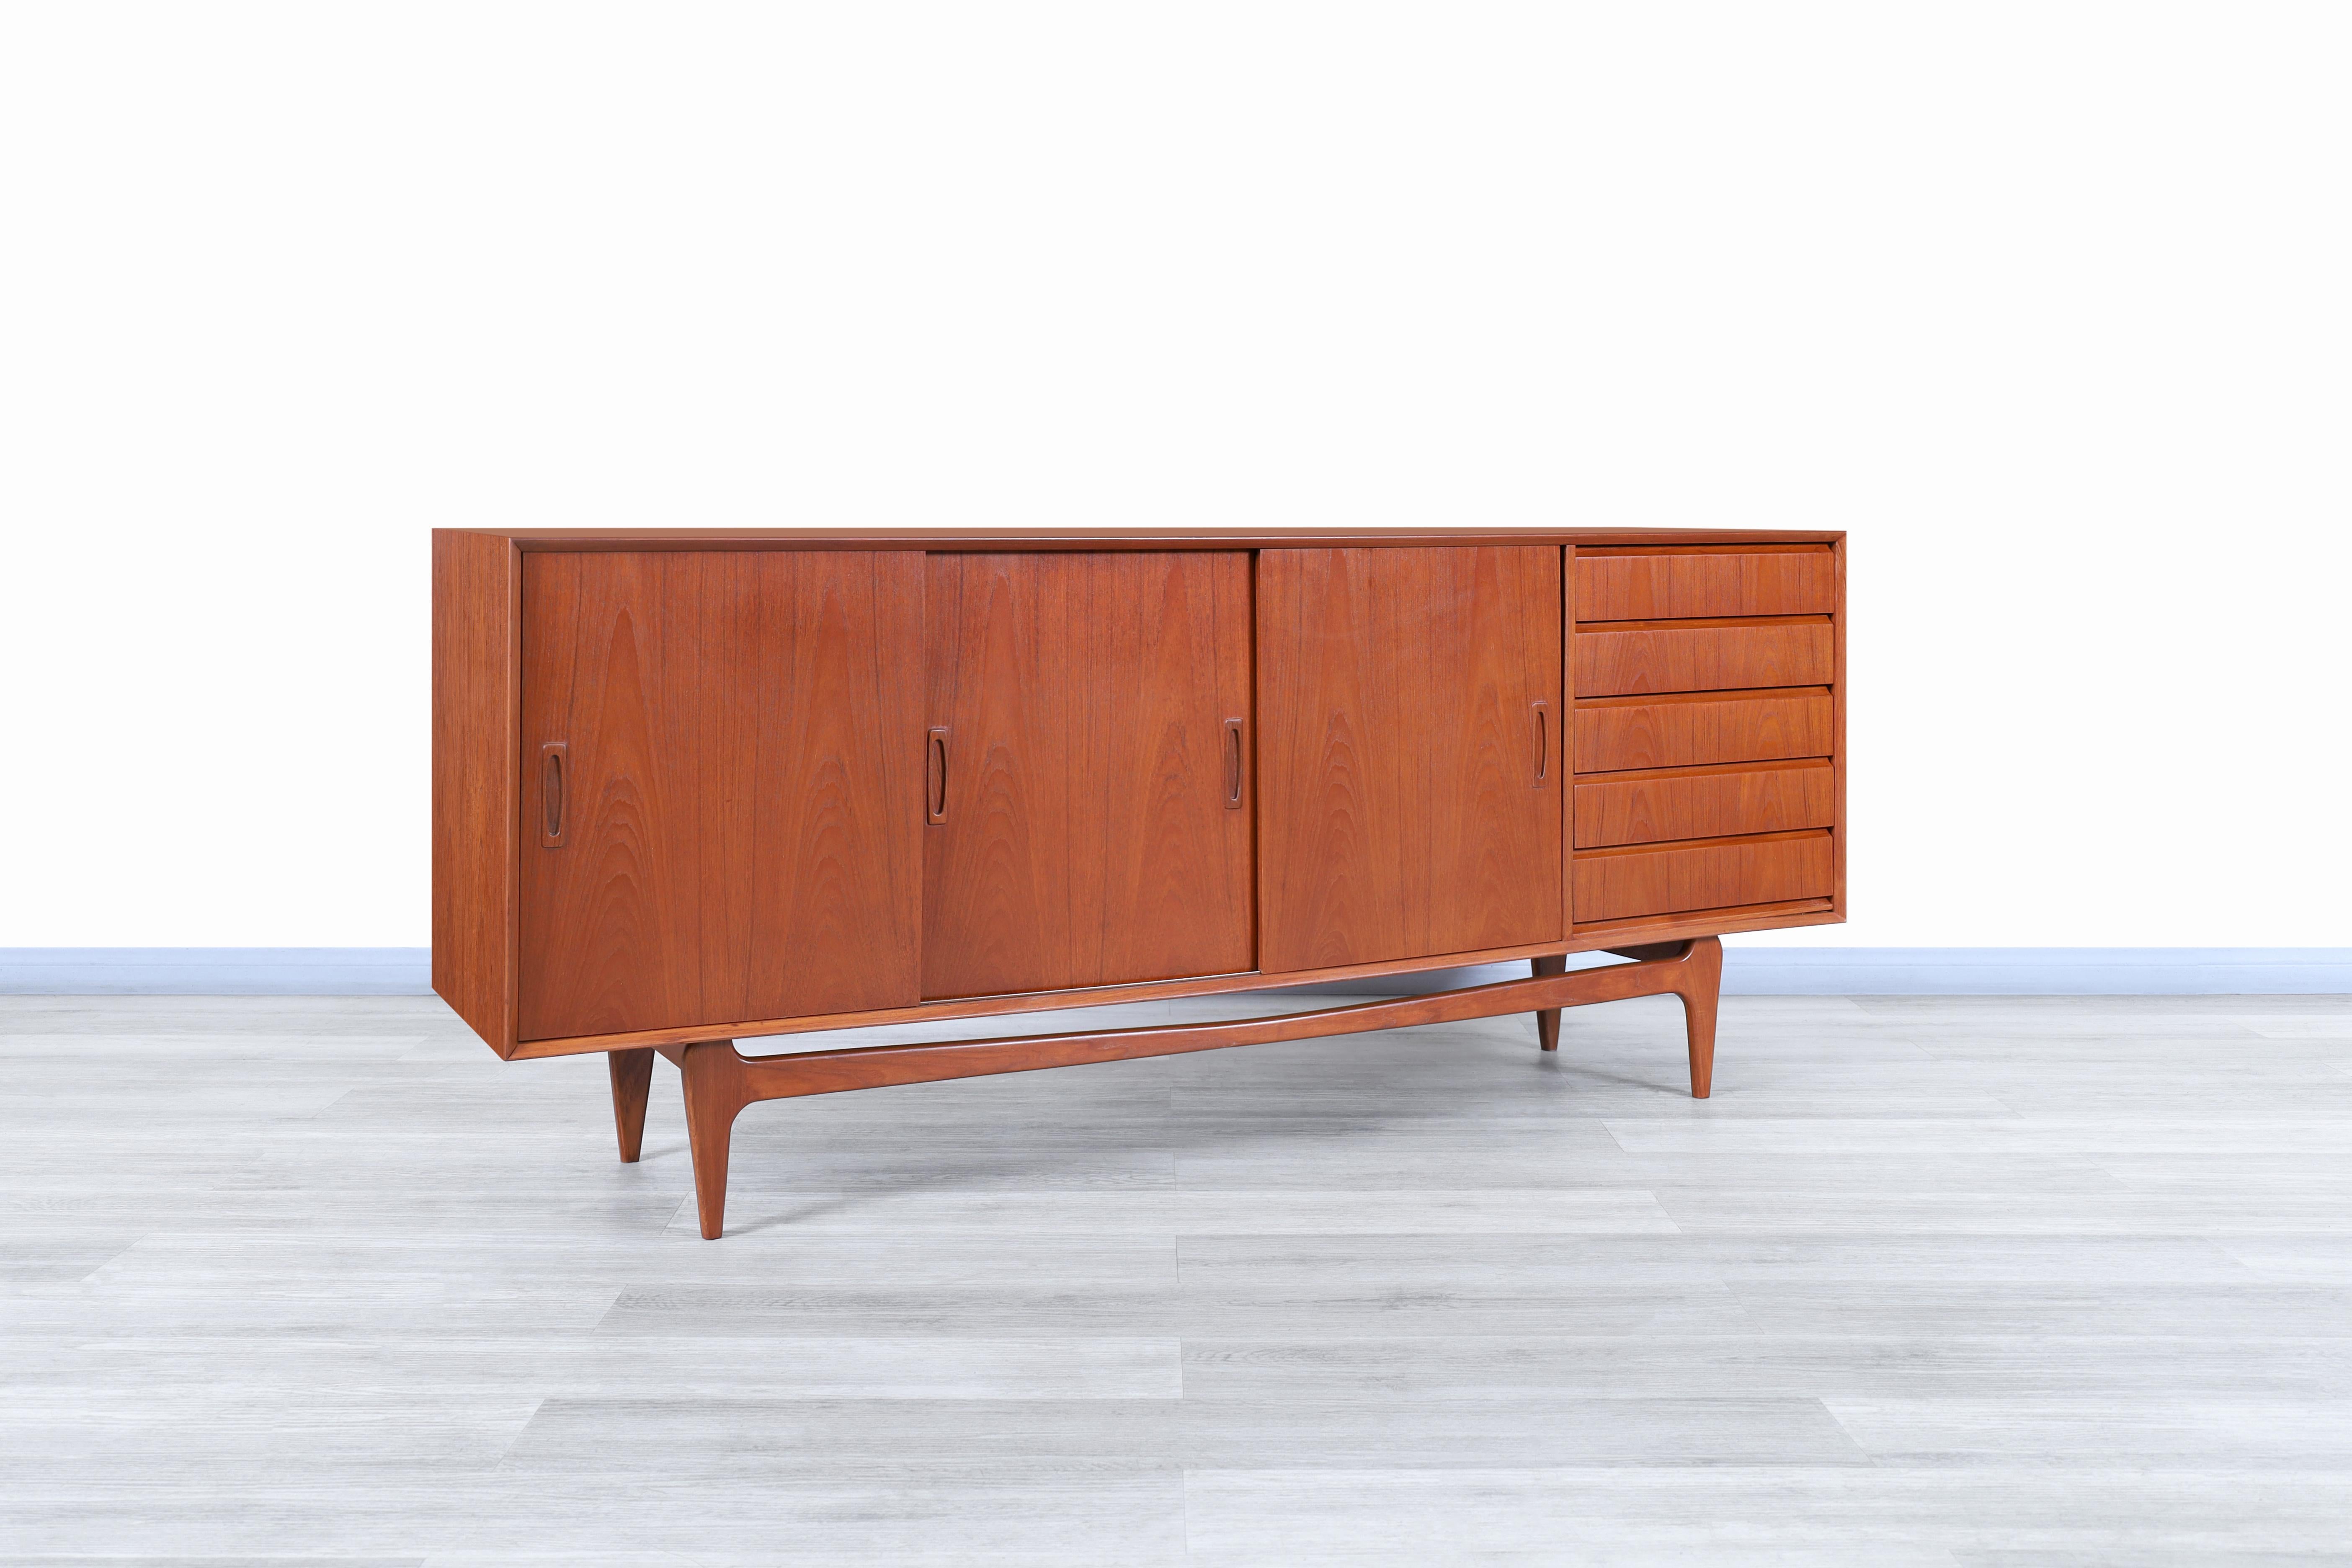 Fabulous Danish modern teak credenza designed and manufactured in Denmark, circa 1960s. This credenza has an elegant and functional design, characteristics that make it a worthy piece of furniture representative of Scandinavian innovation. This